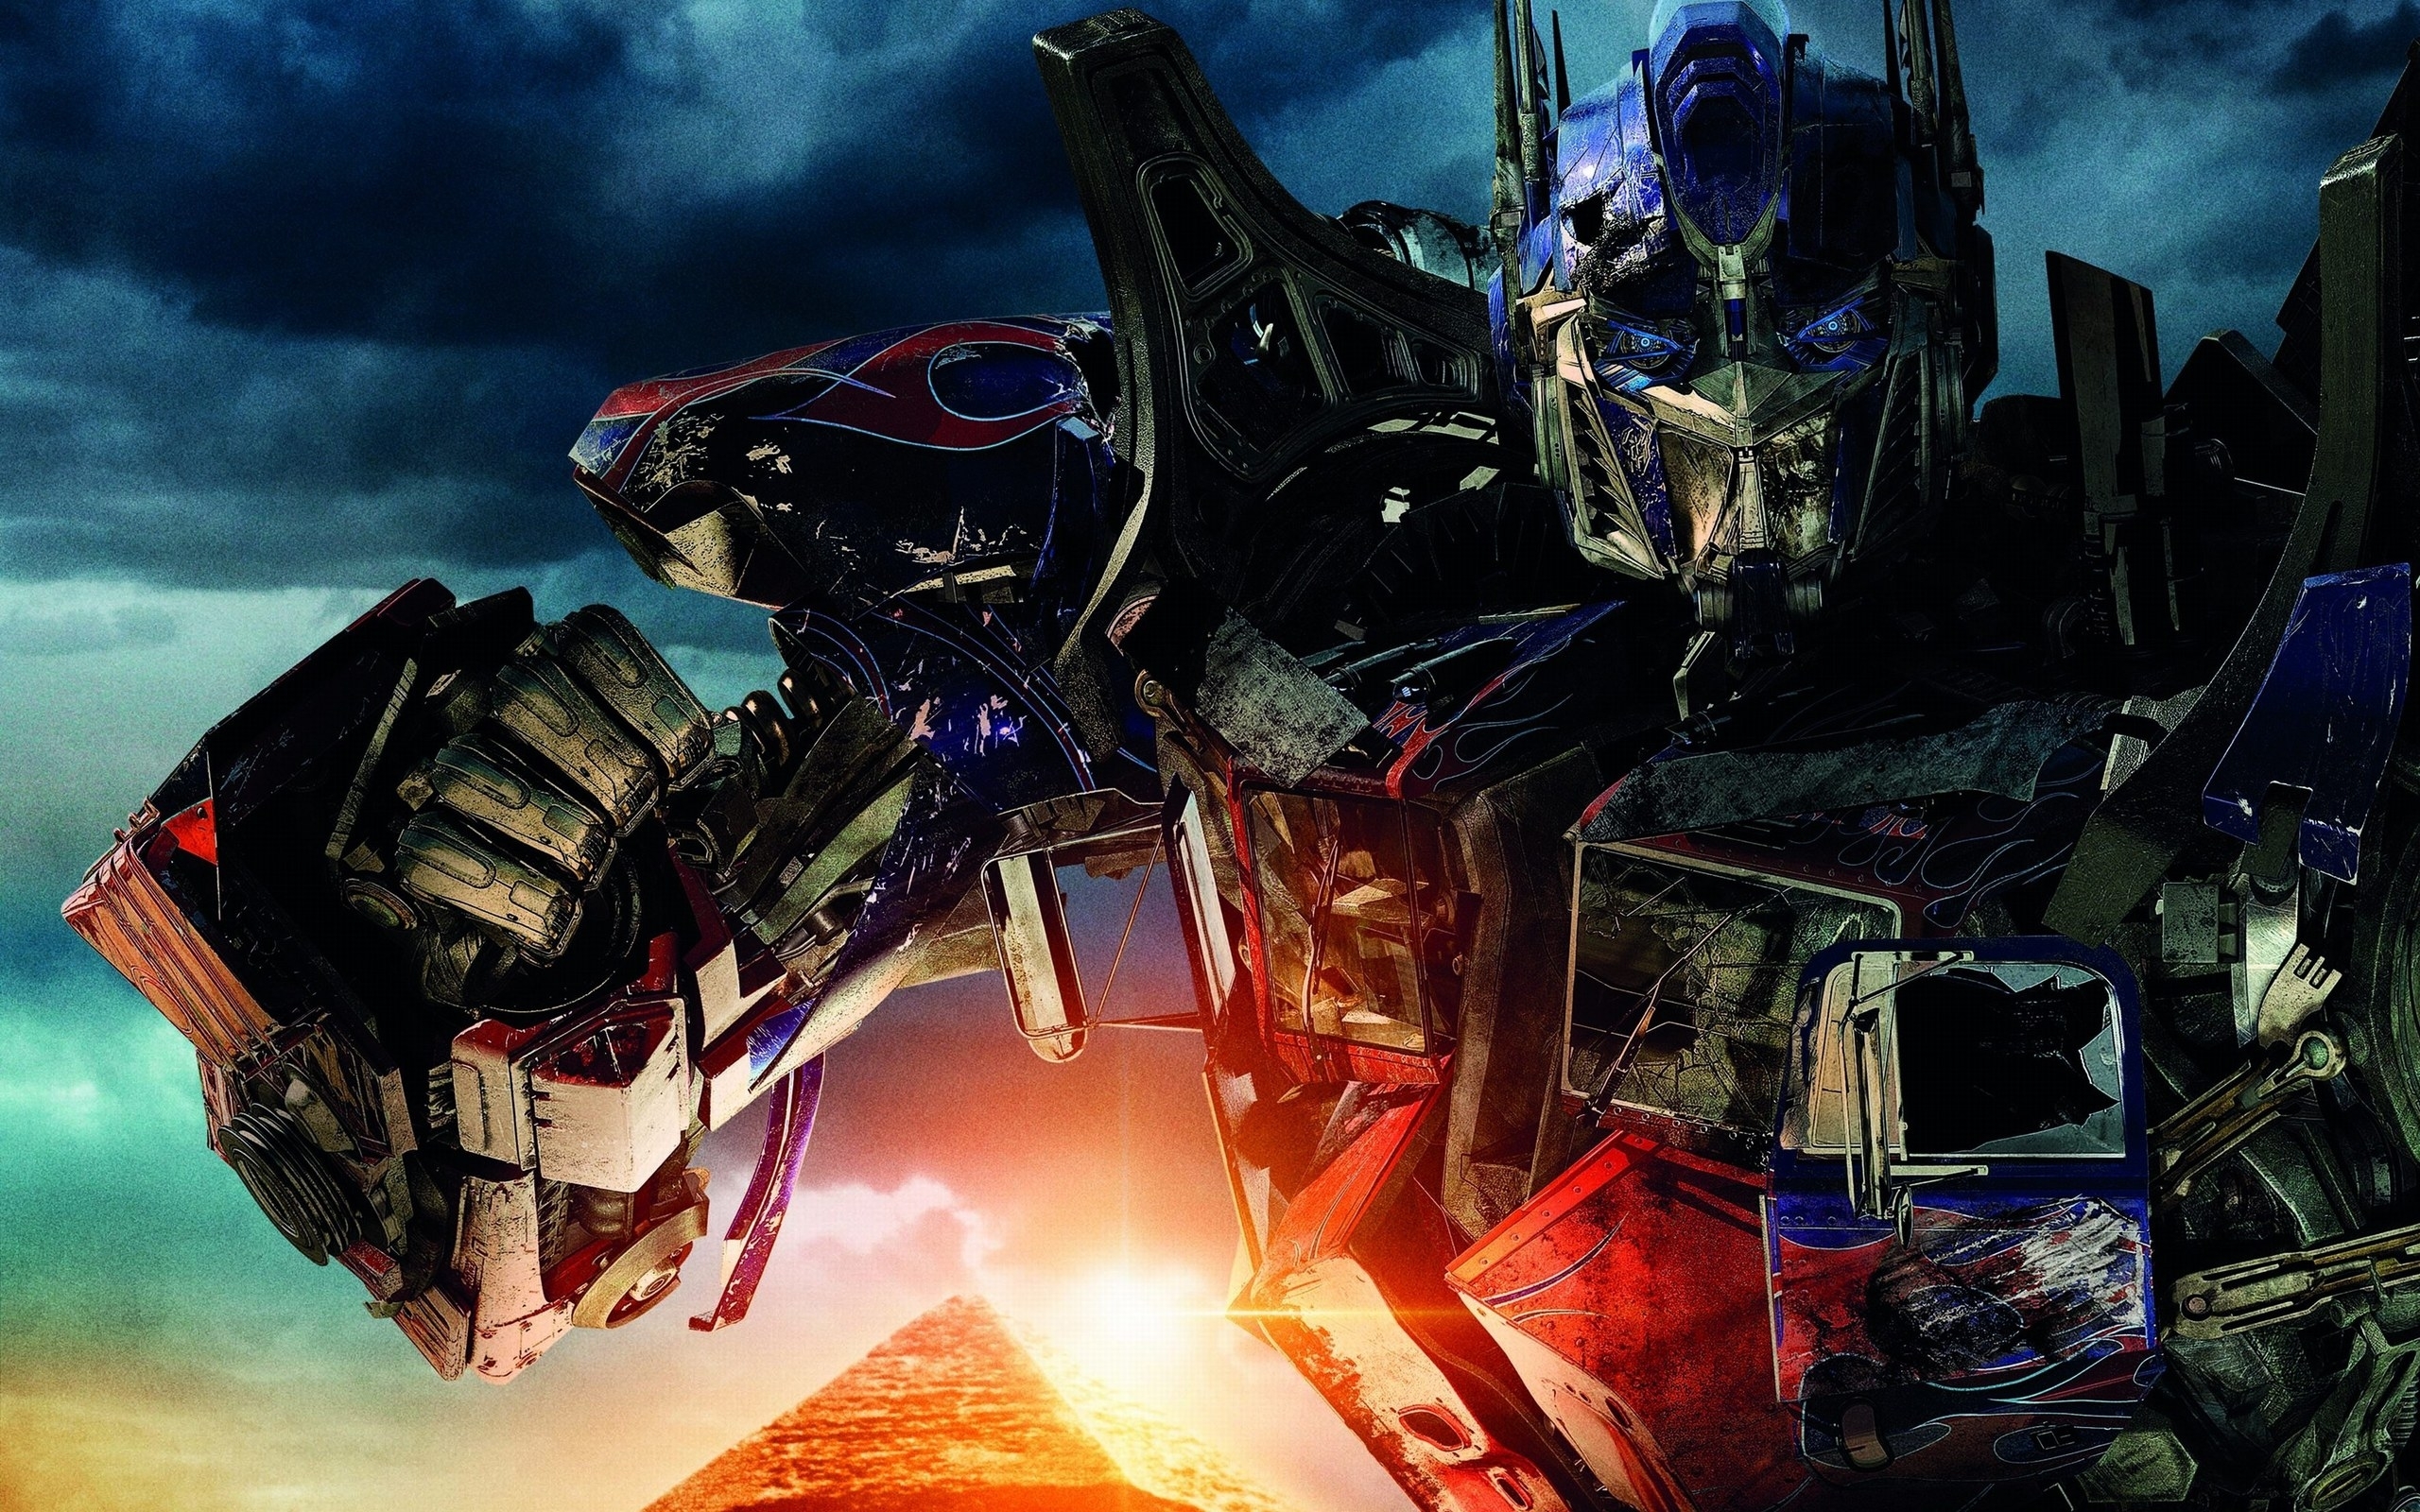 Mobile wallpaper: Transformers, Cinema, 43543 download the picture for free.